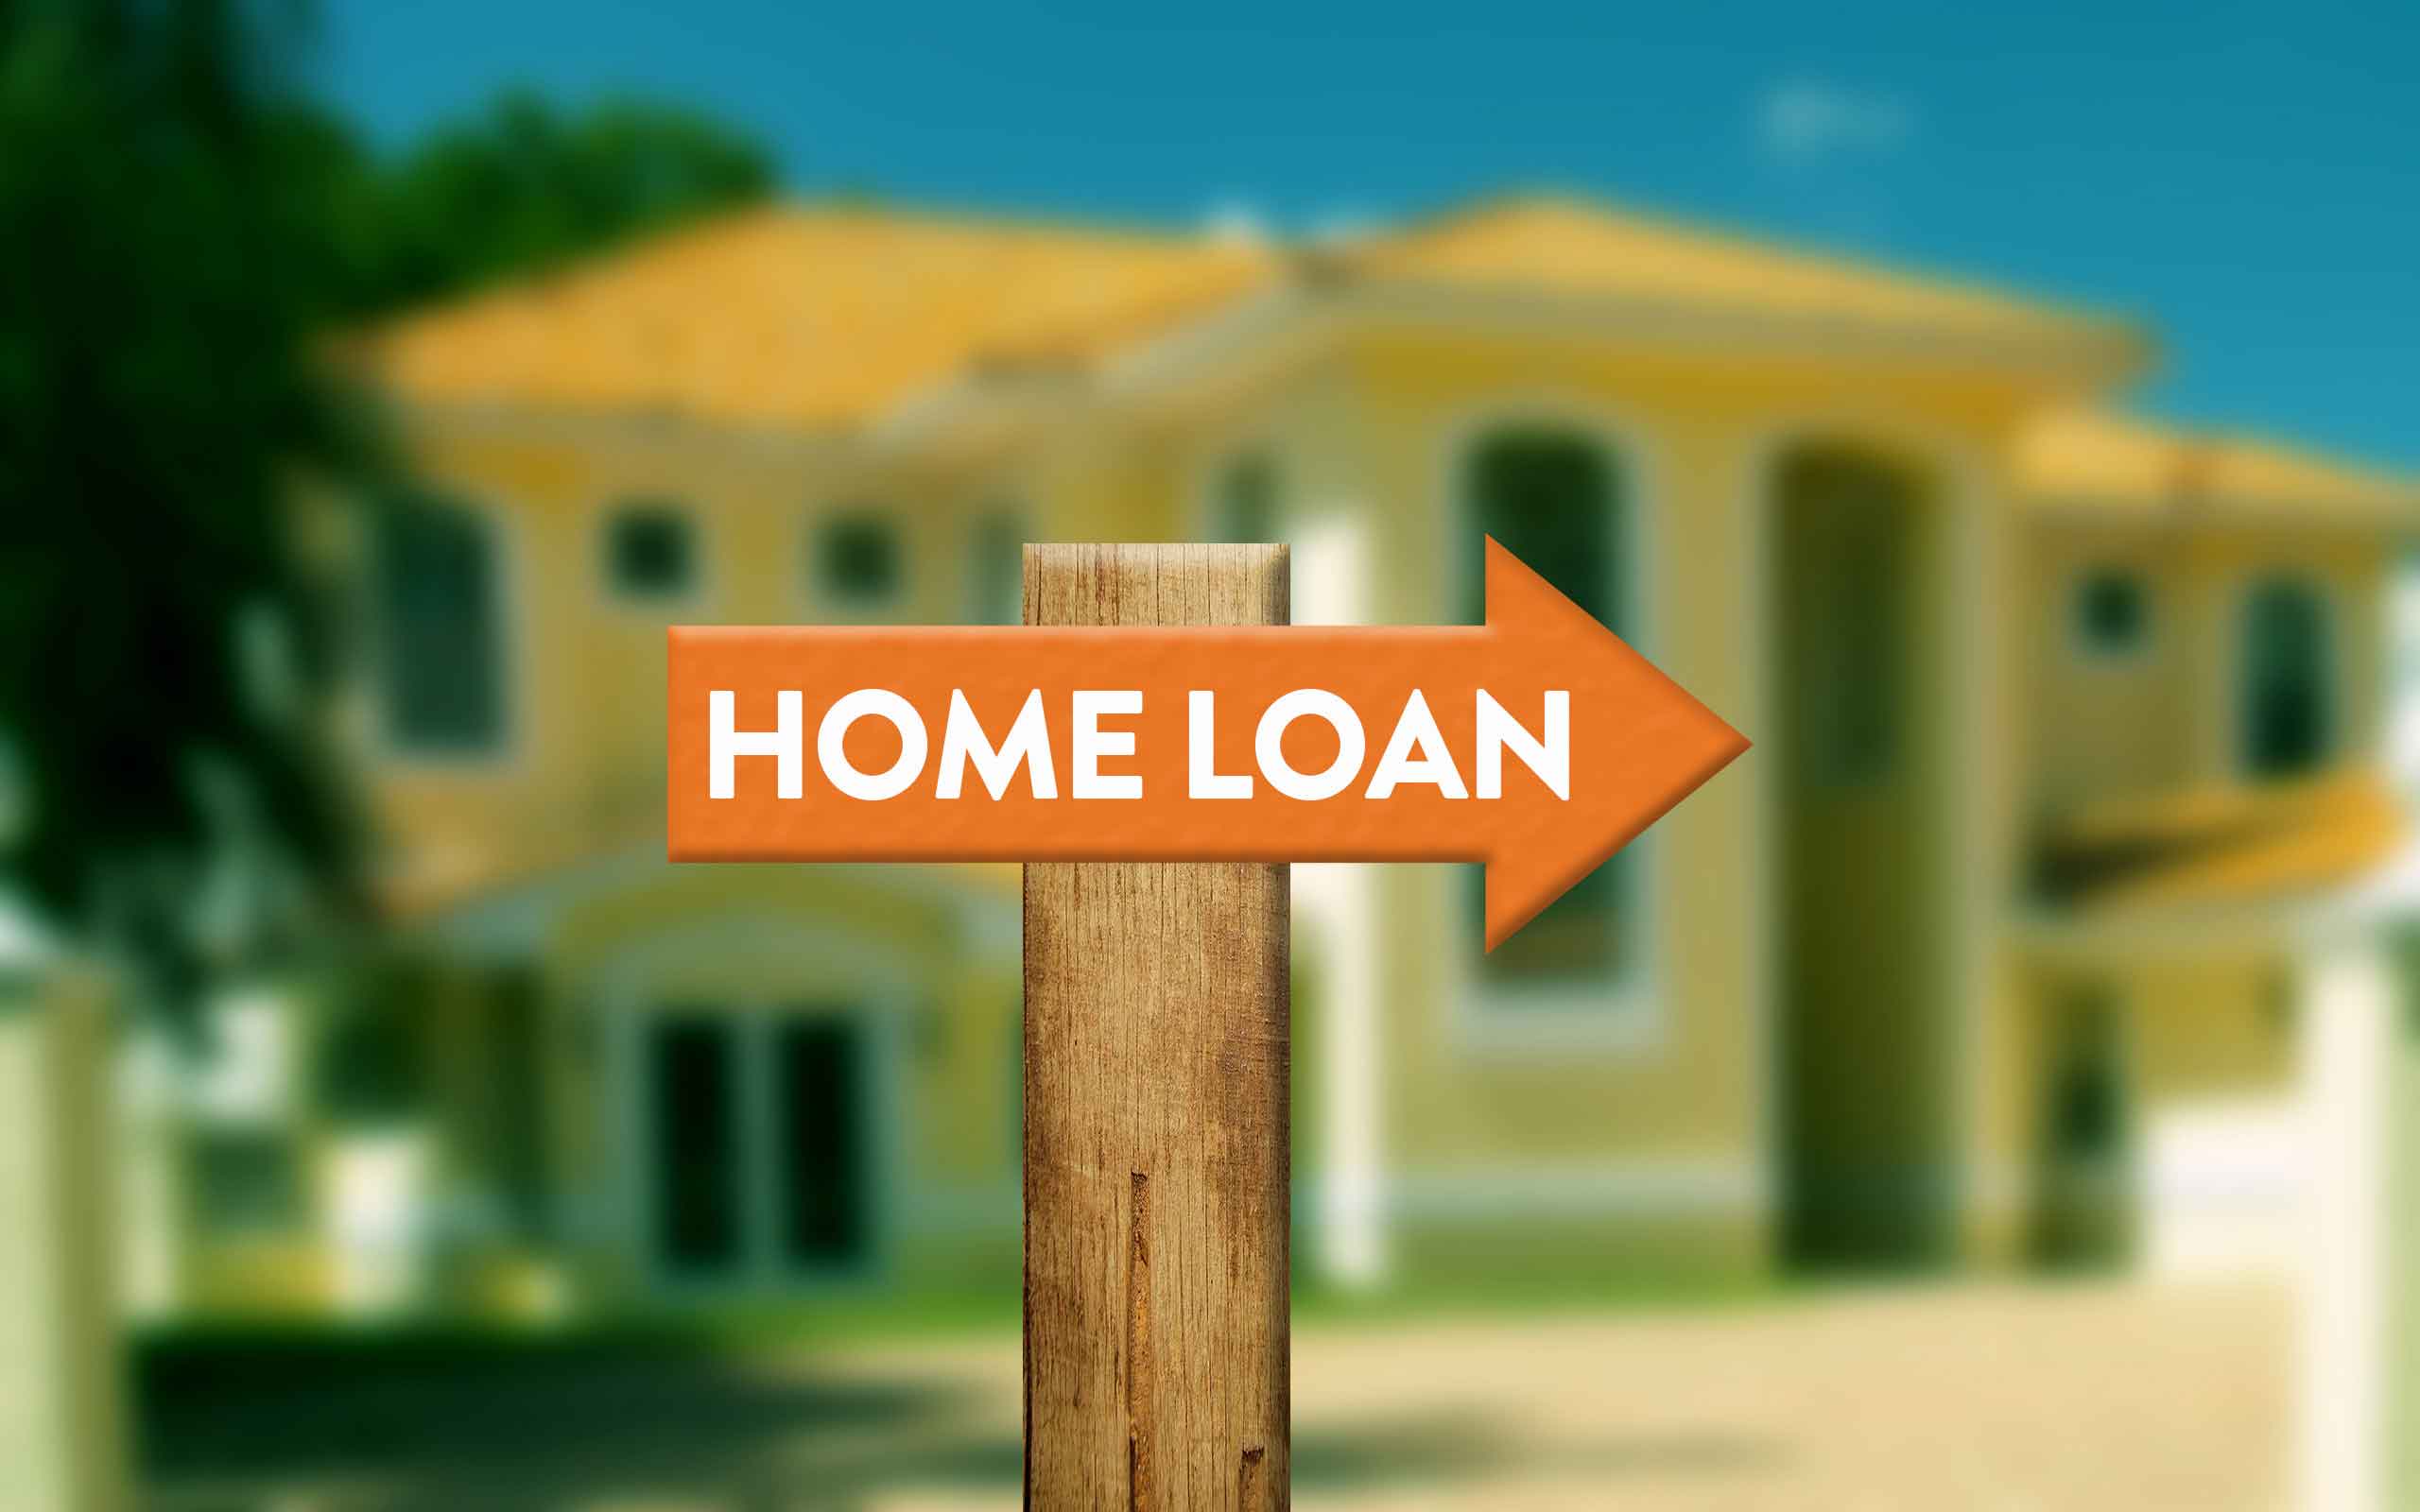 Online vs. Offline: Which Is A Better Way To Apply For A Home Loan?